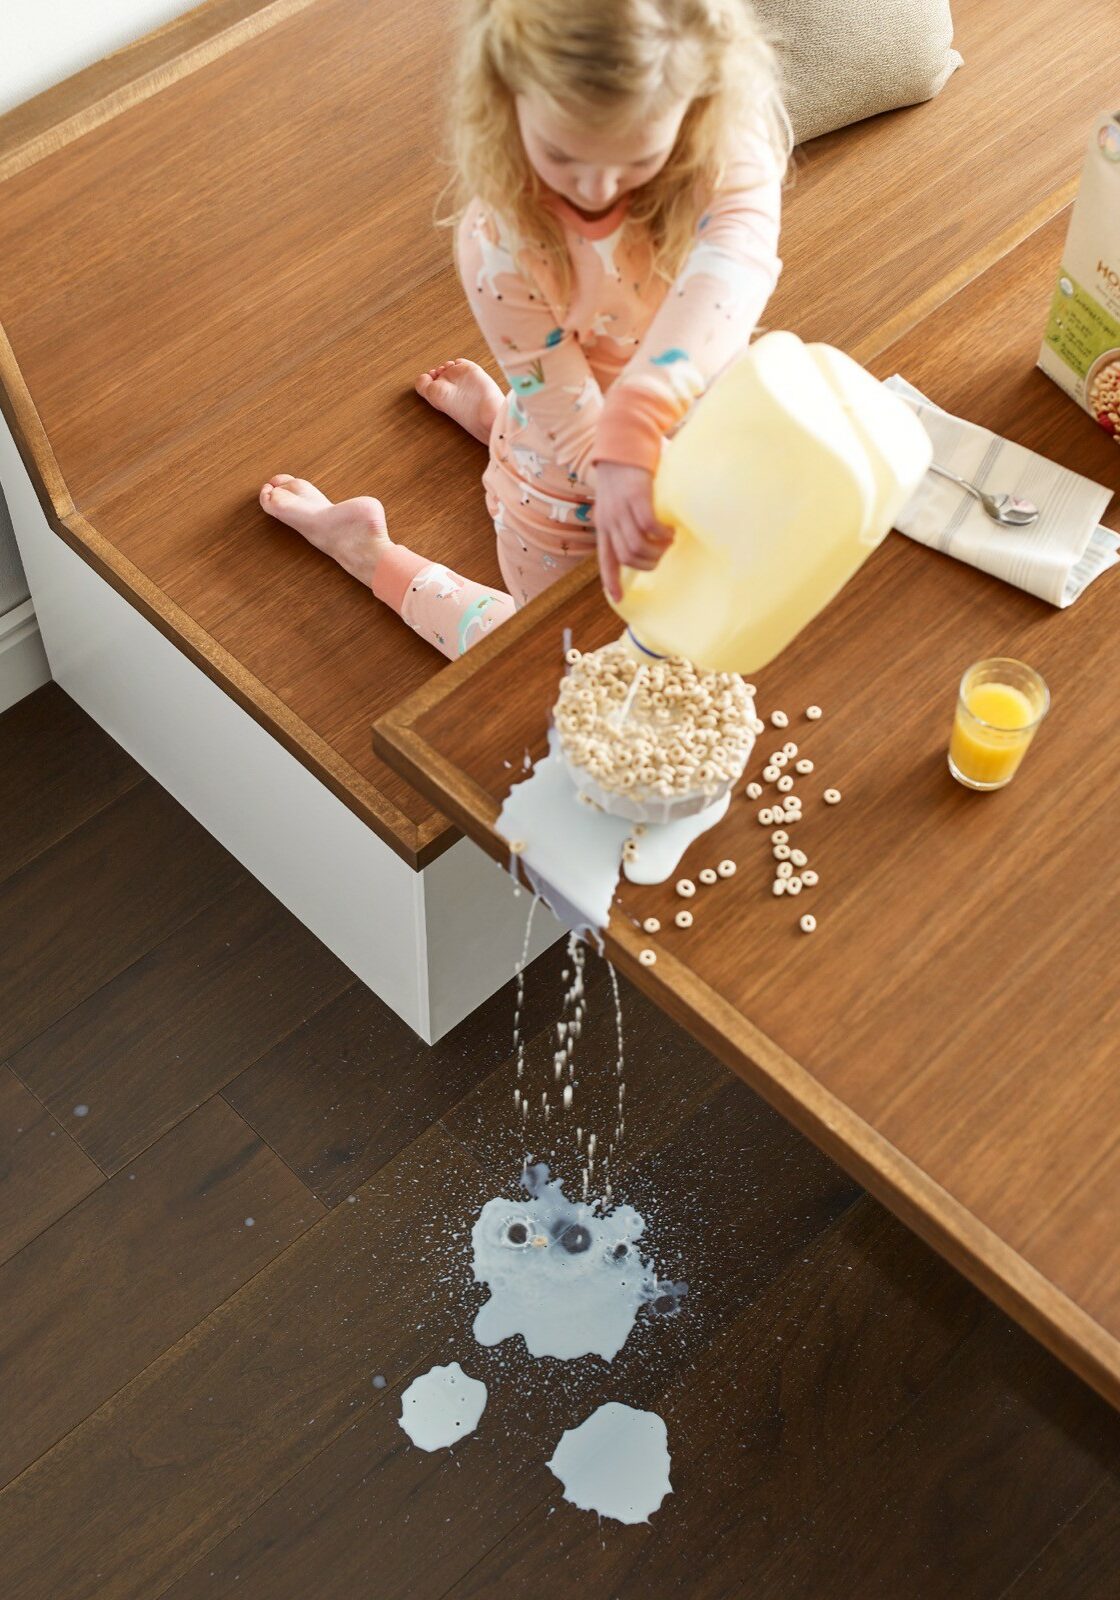 Milk spill cleaning | About Floors N' More